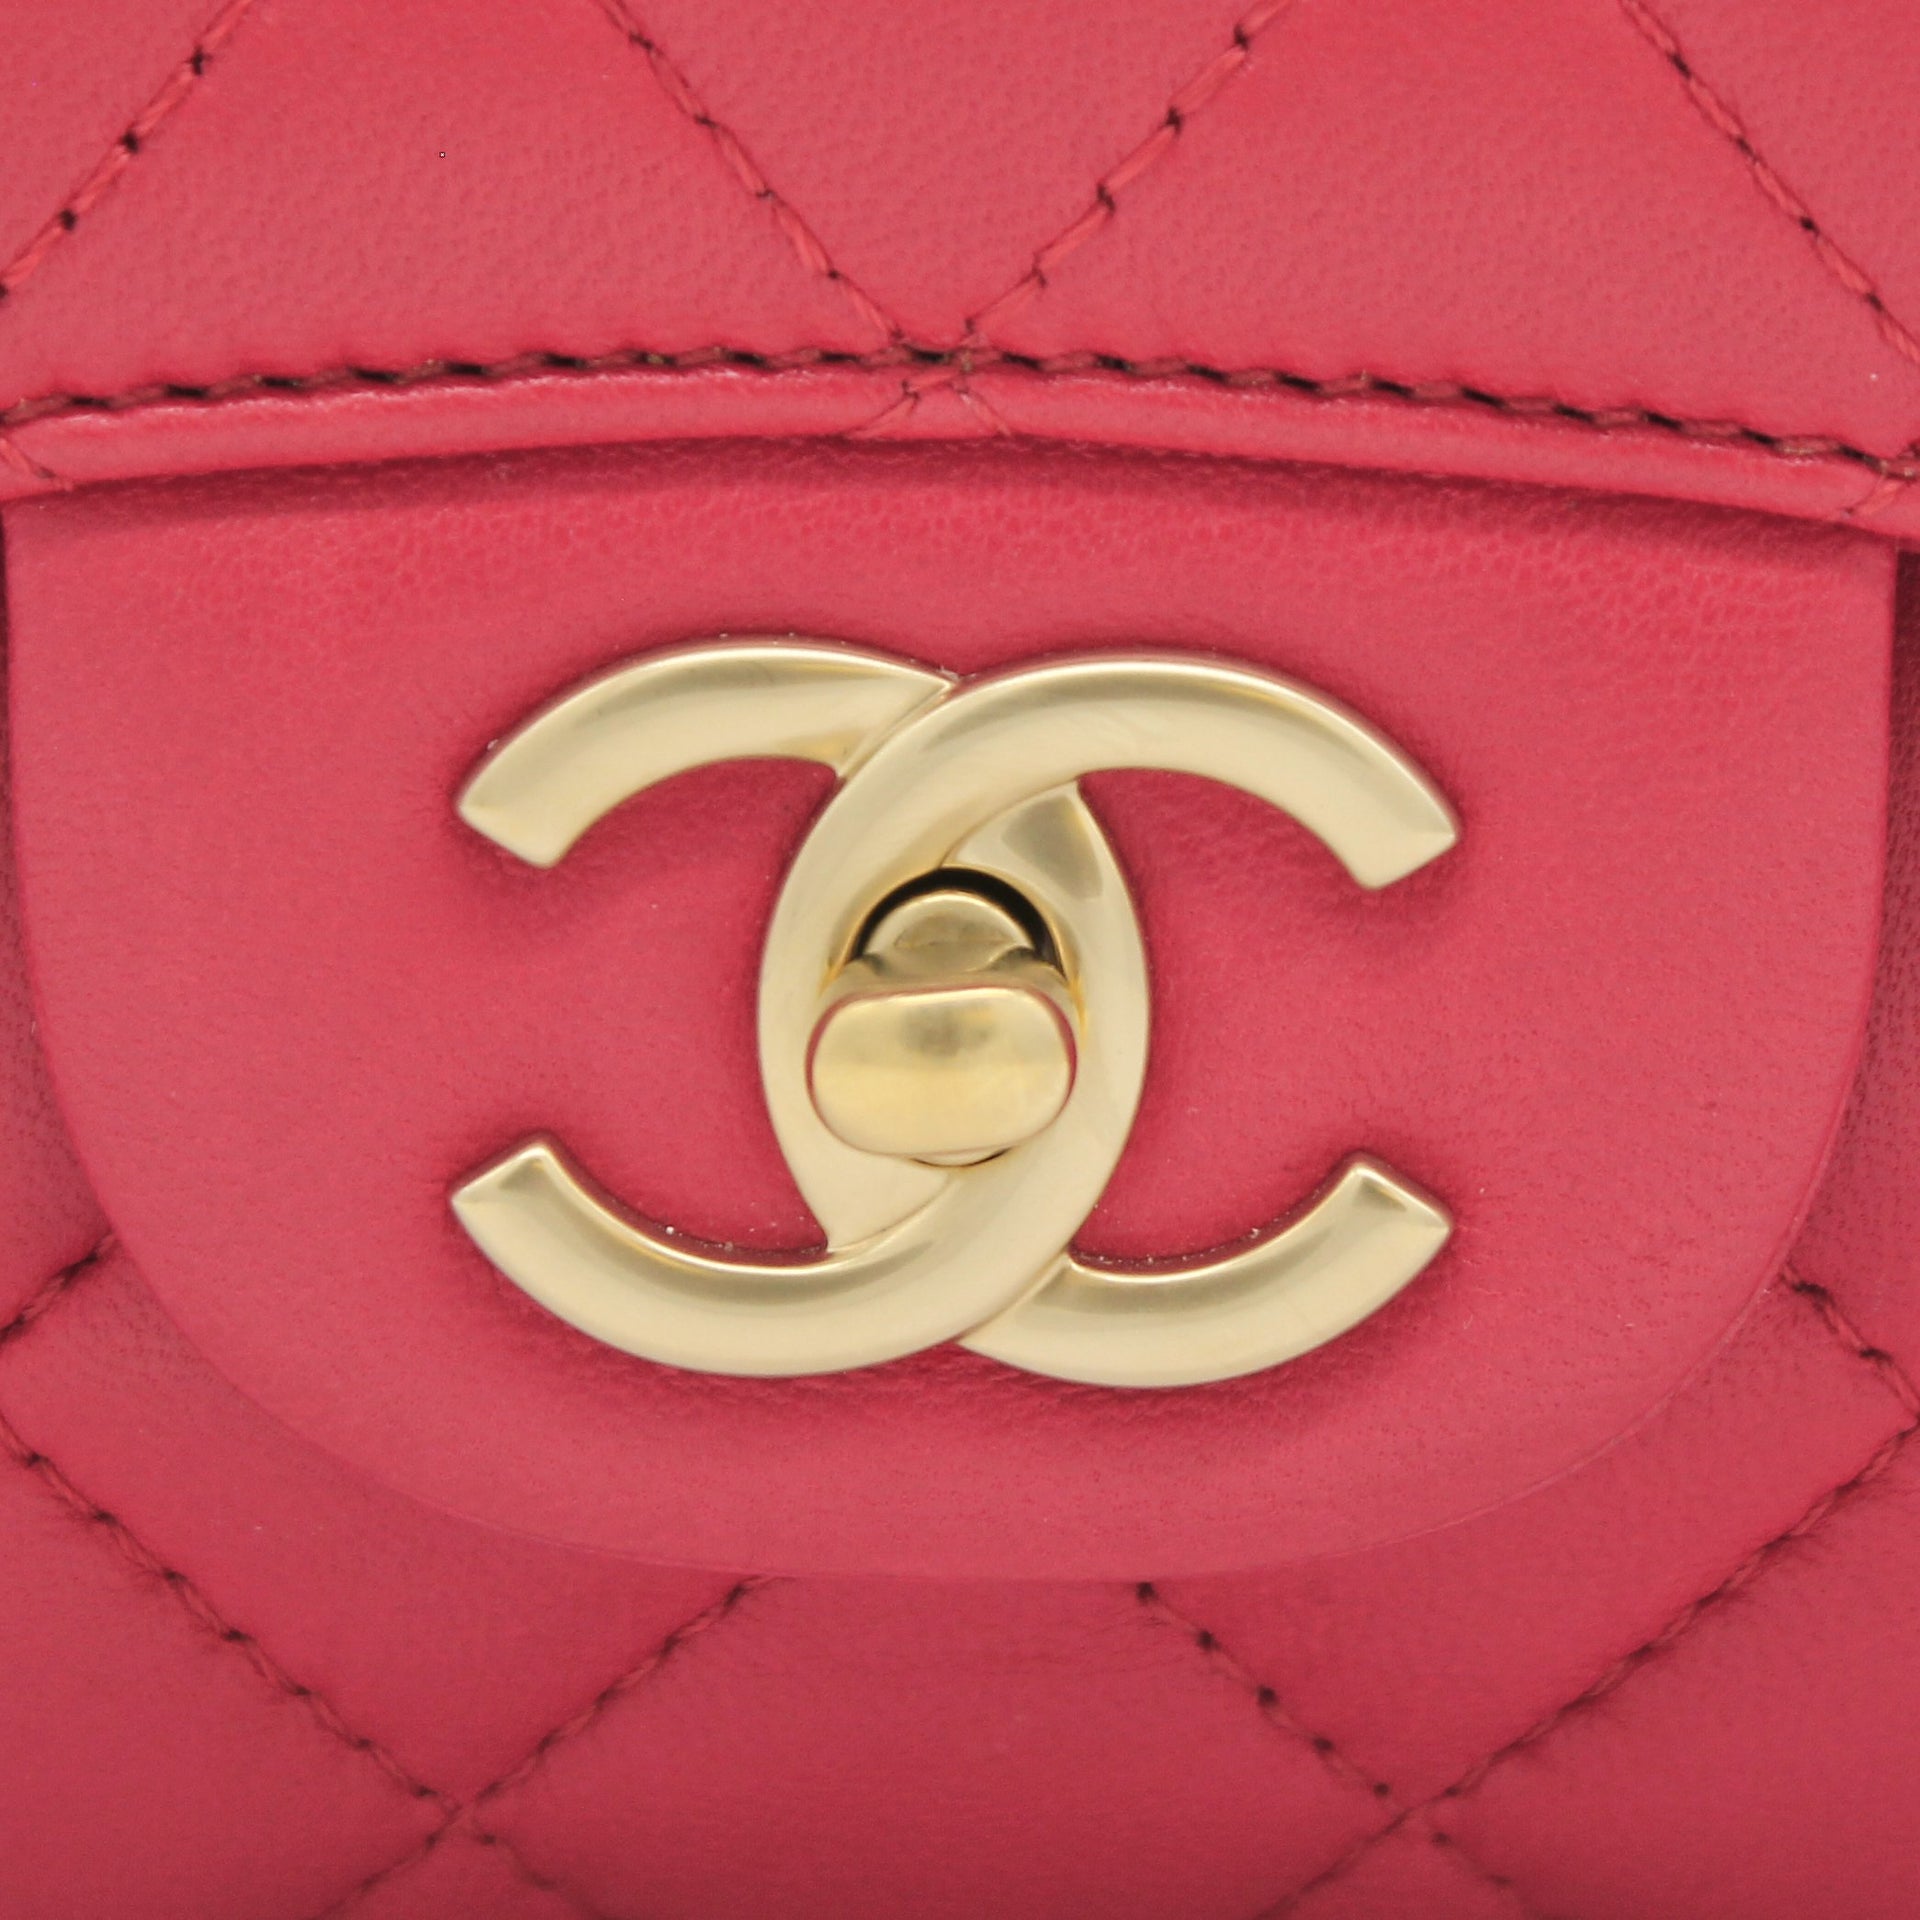 Chanel Dark Pink Quilted Lambskin Mademoiselle Chic Mini Flap Bag Gold Hardware, 2016 (Very Good)